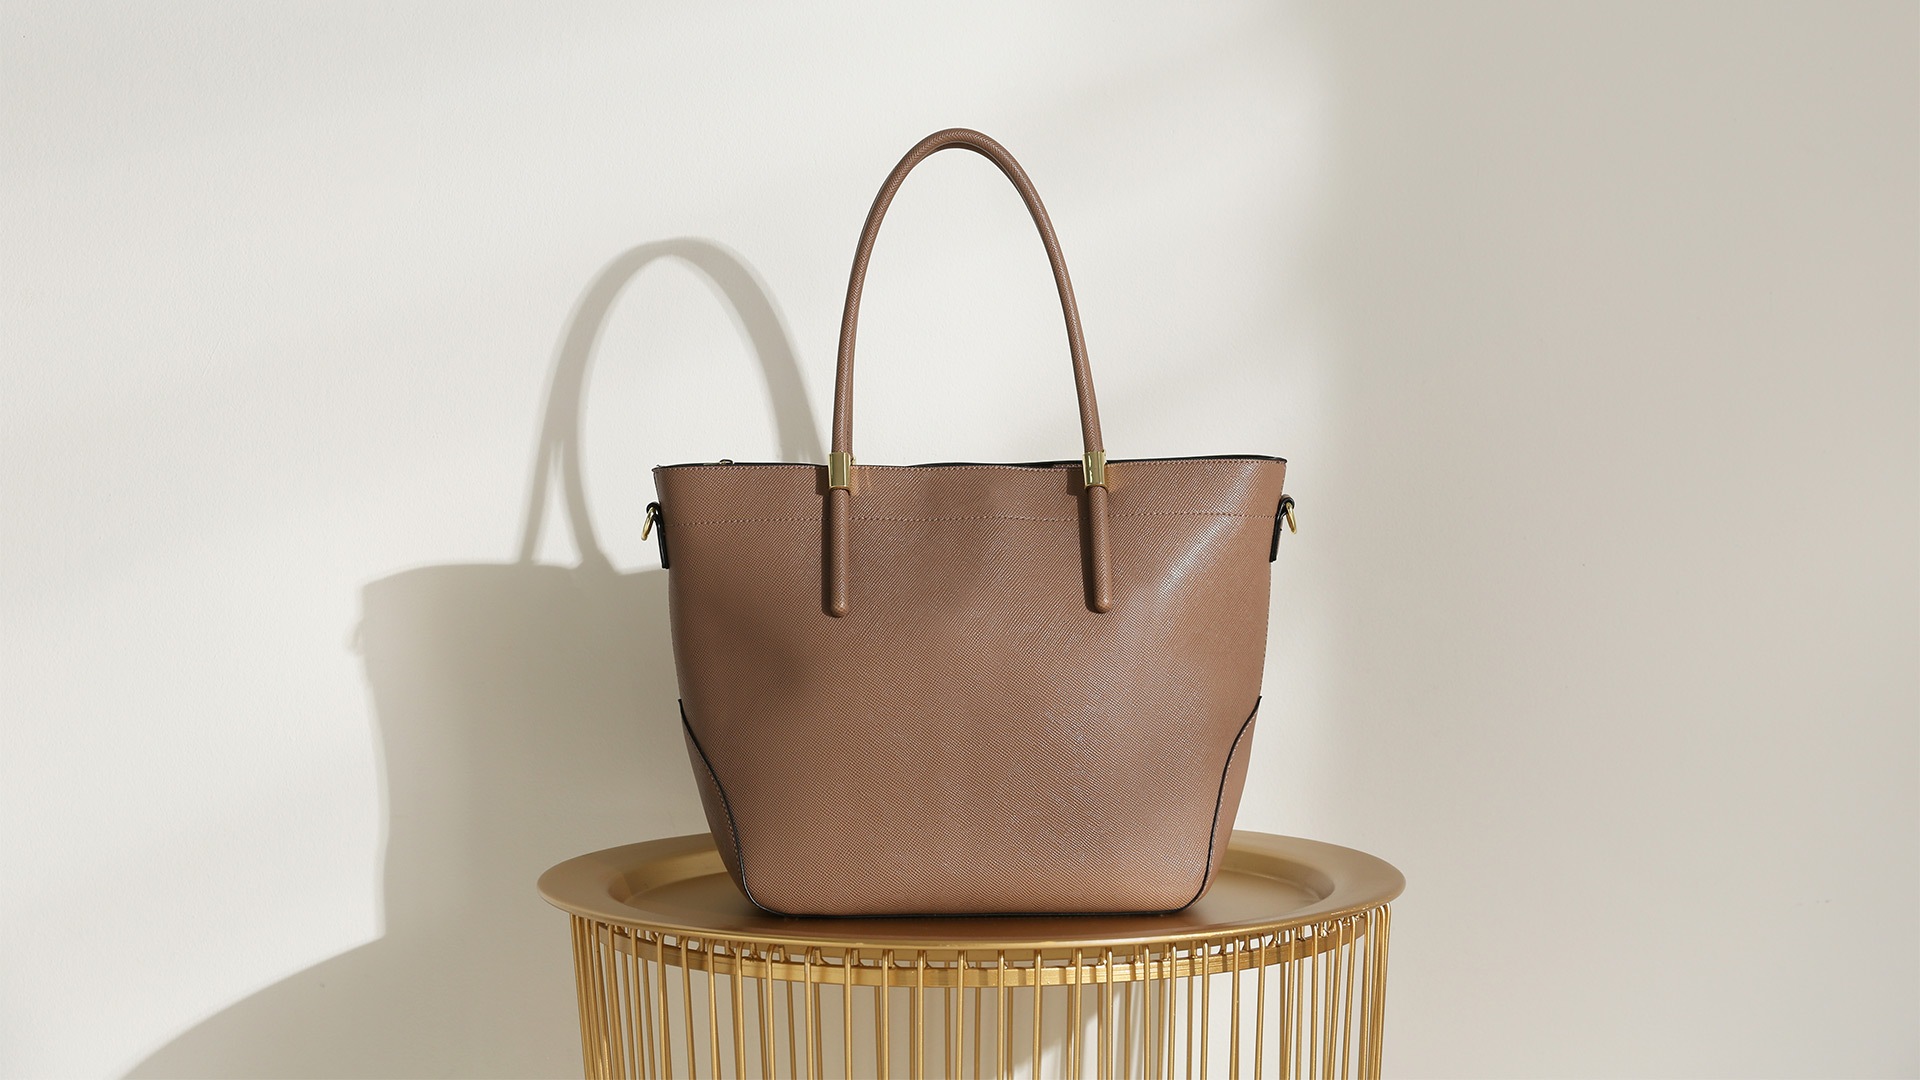 A leather bag in beige from a luxury bag brand in Singapore